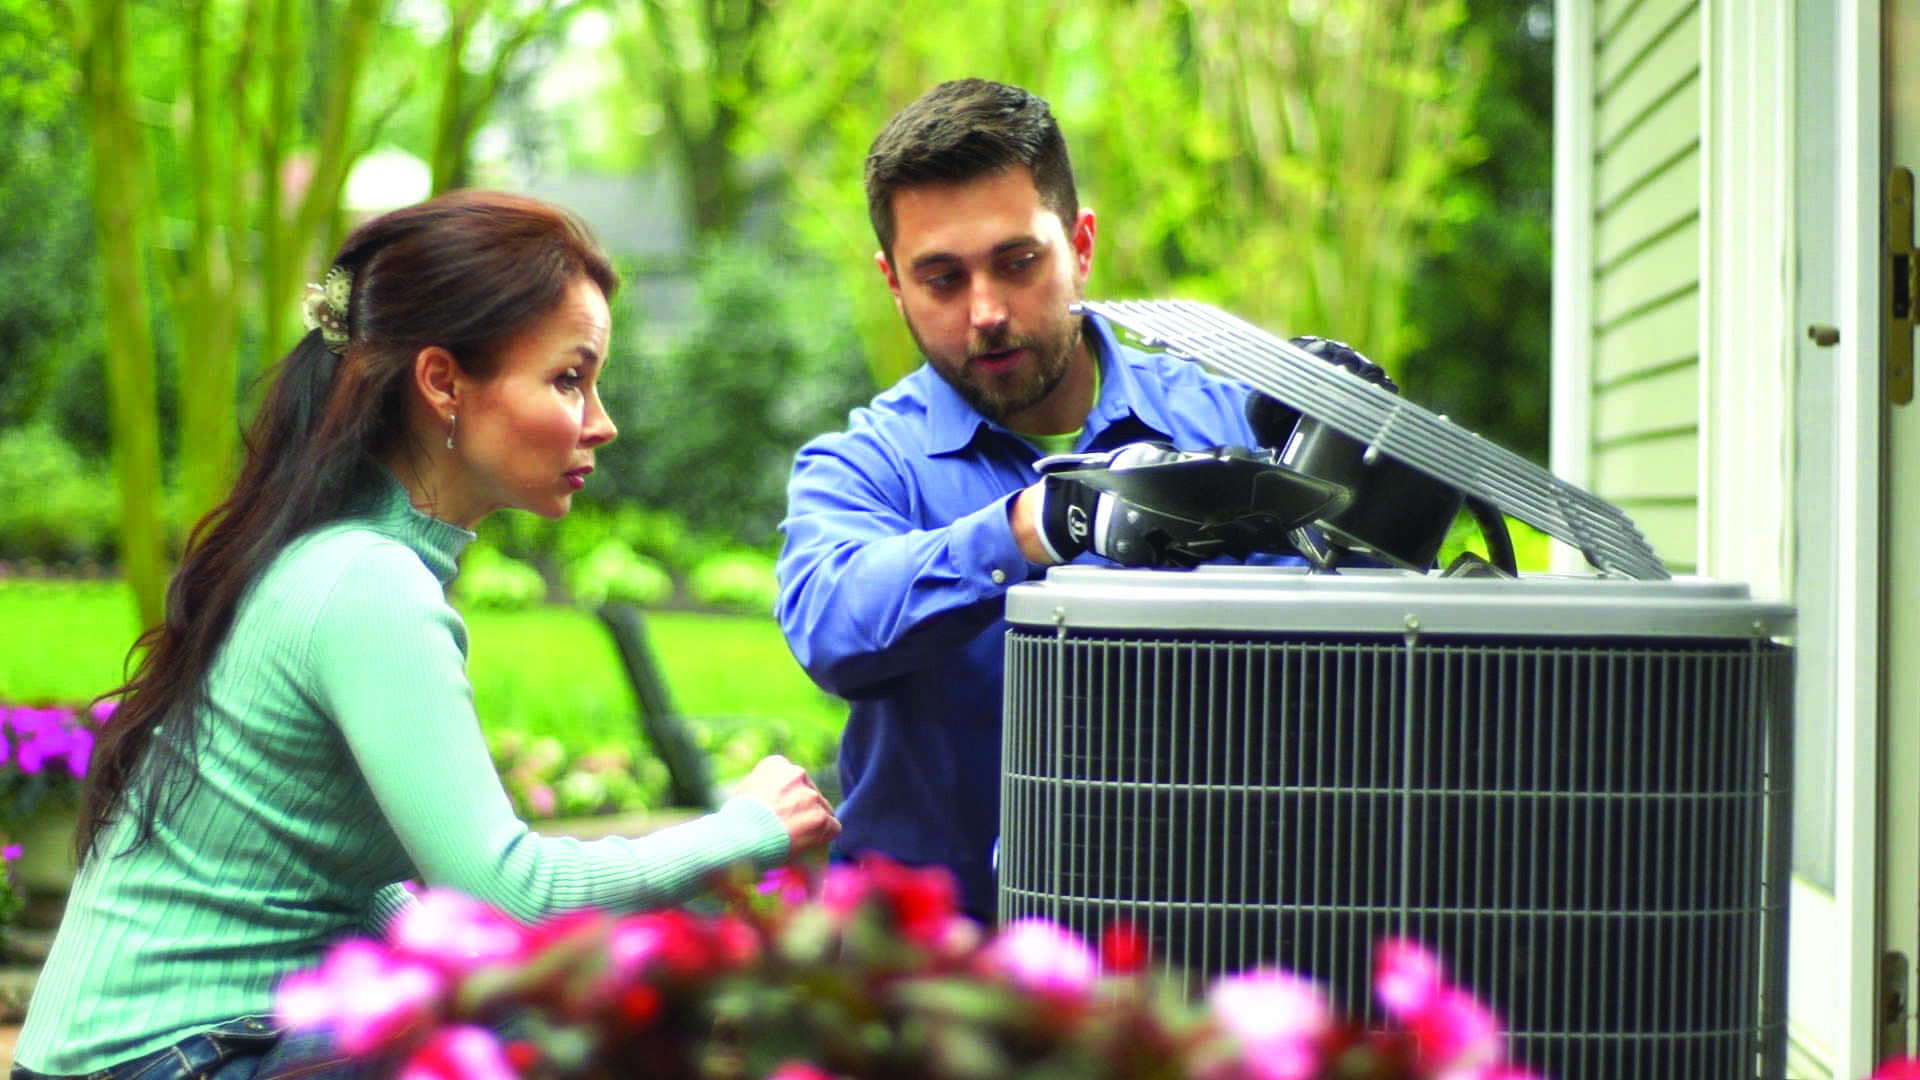 Trusted AC Repair Services in New Jersey & Pennsylvania